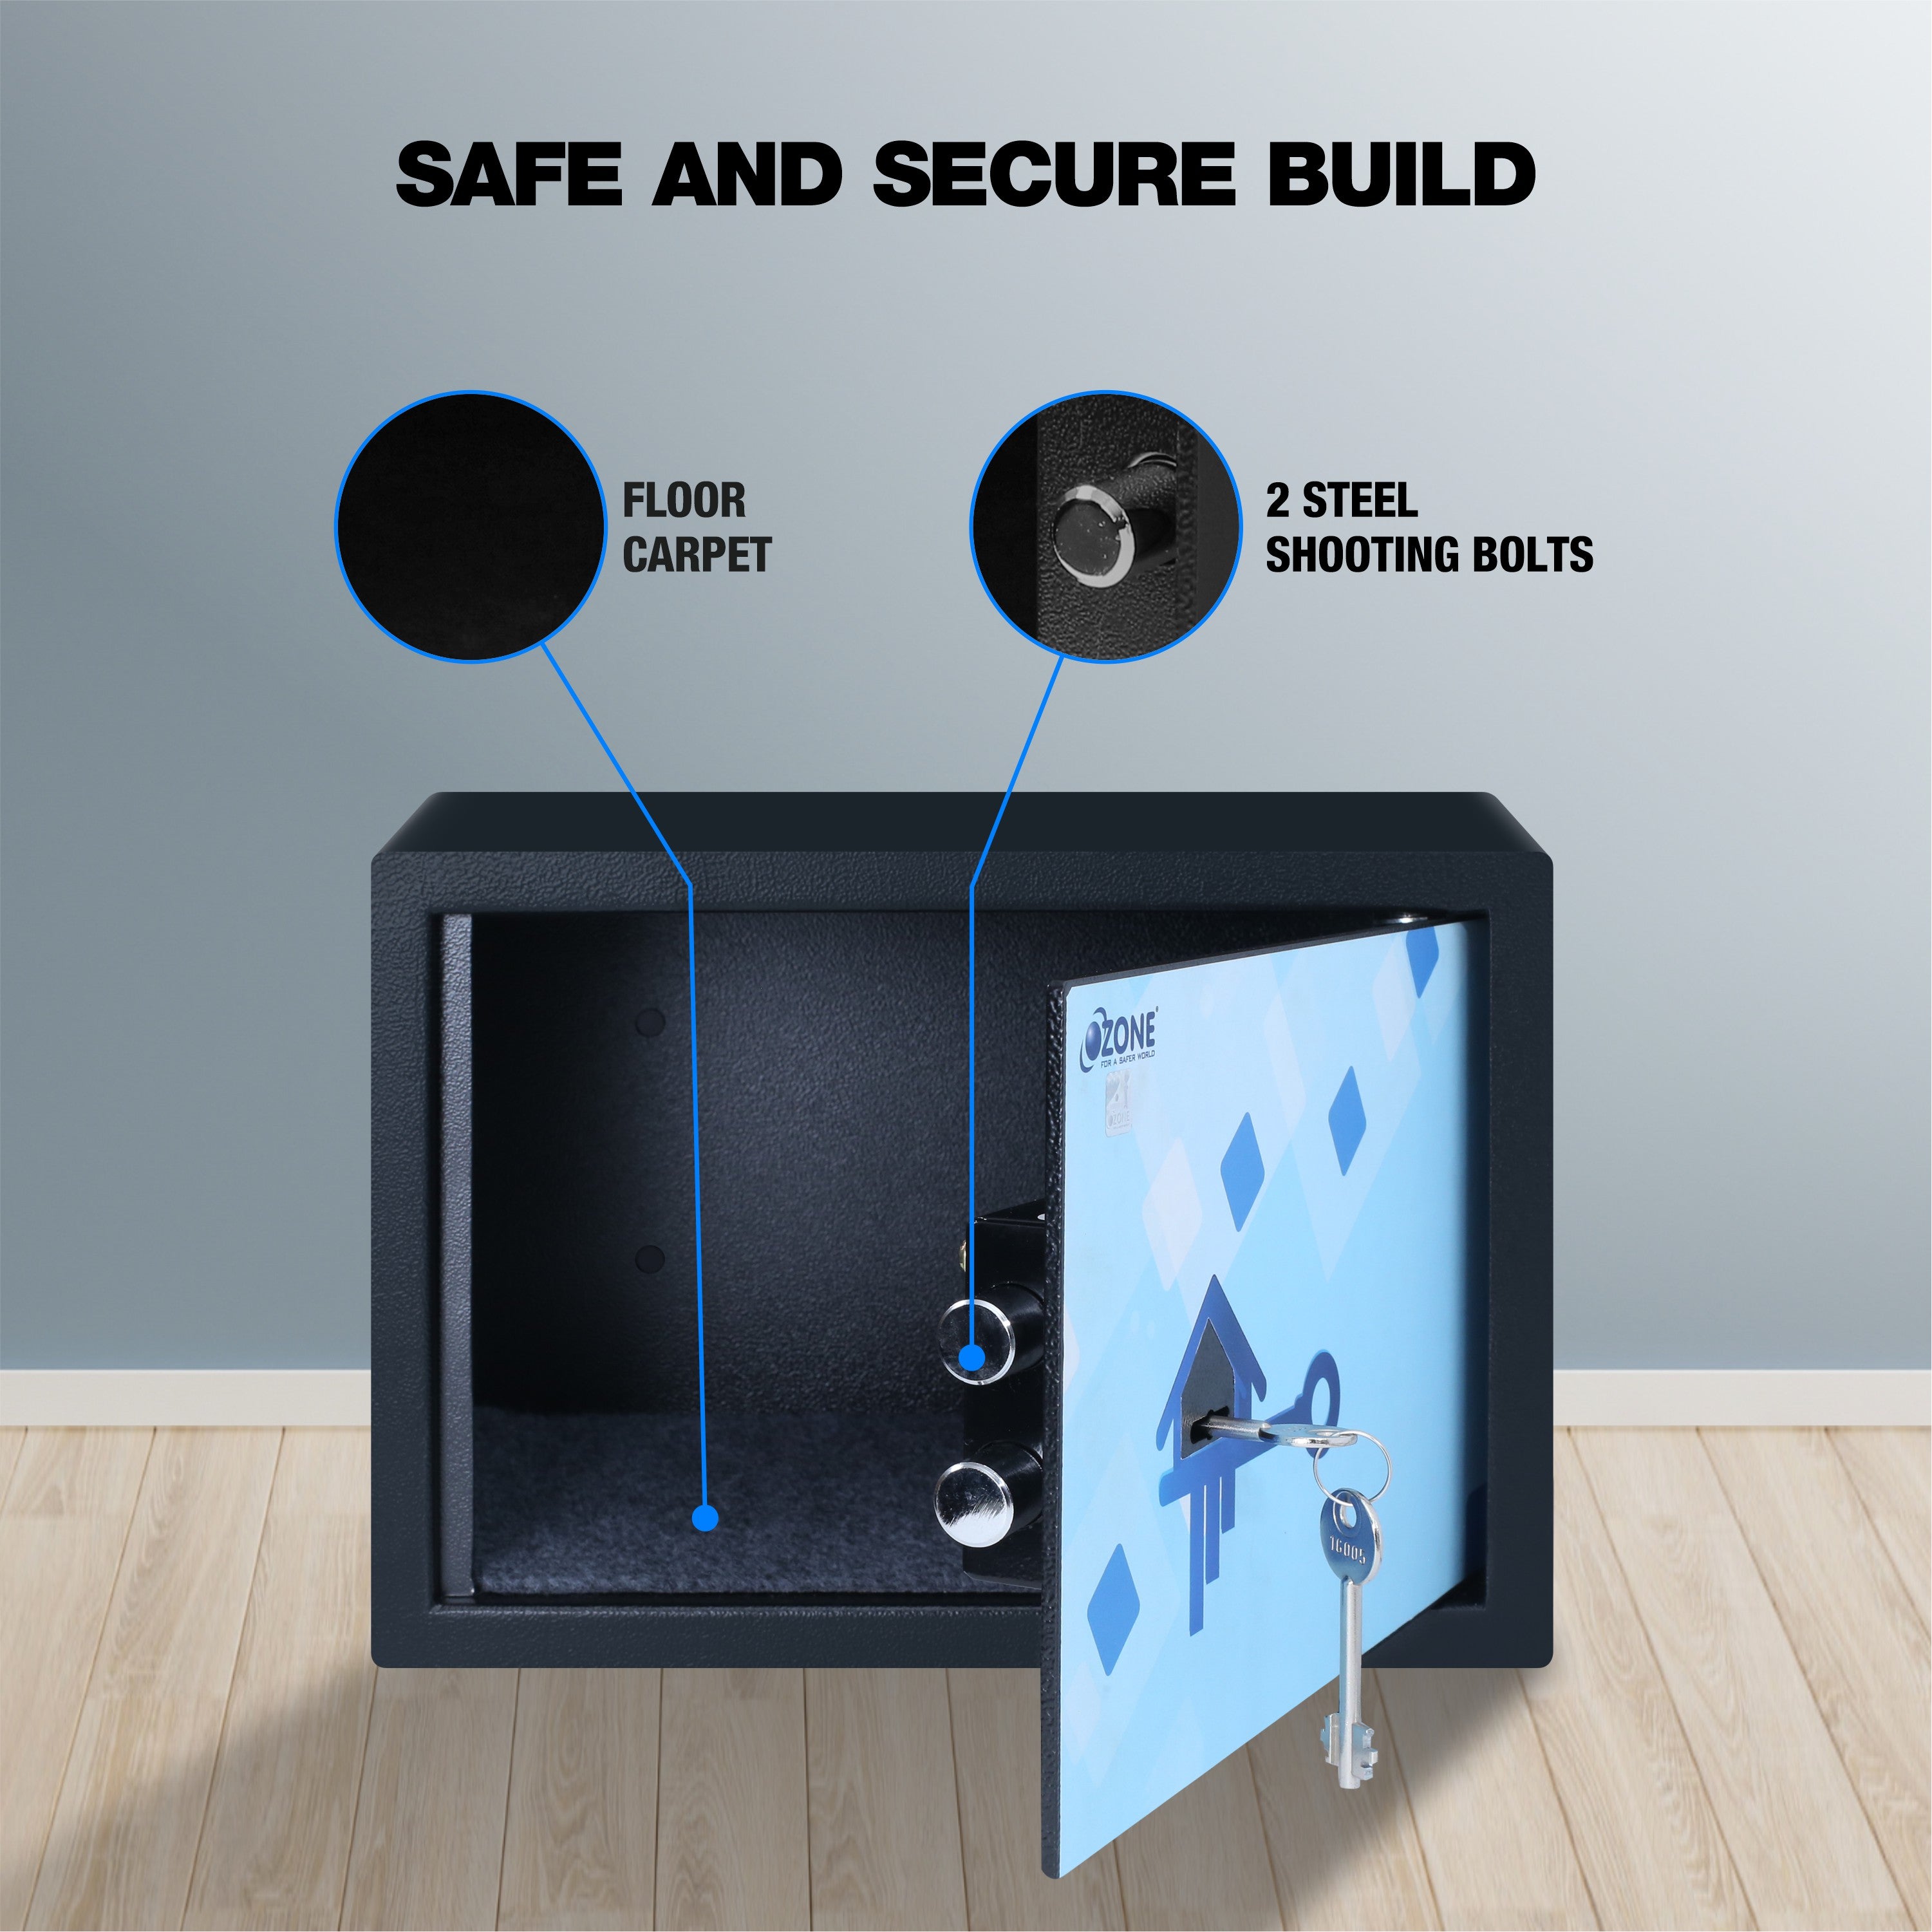 Ozone Mechanical Safe for Homes & Offices | High-security Mechanical Key (15.5 Ltrs.)